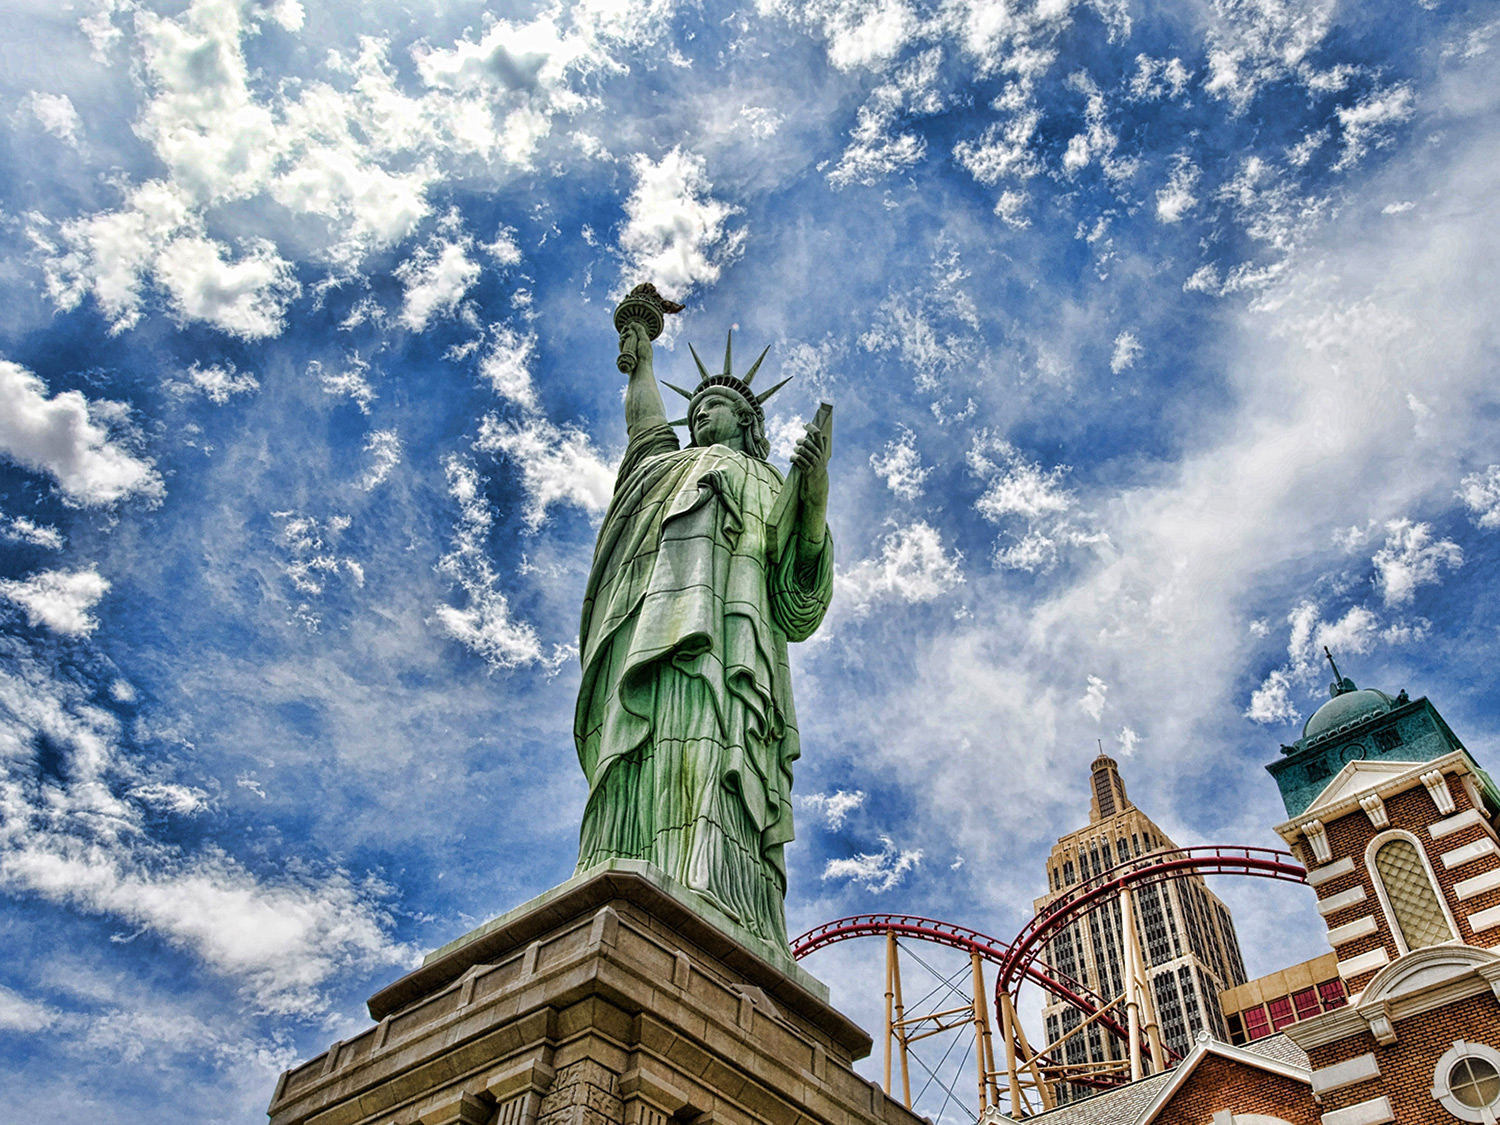 statue_of_liberty_new_york_united_states_of_america_hdr_682_3840x2160